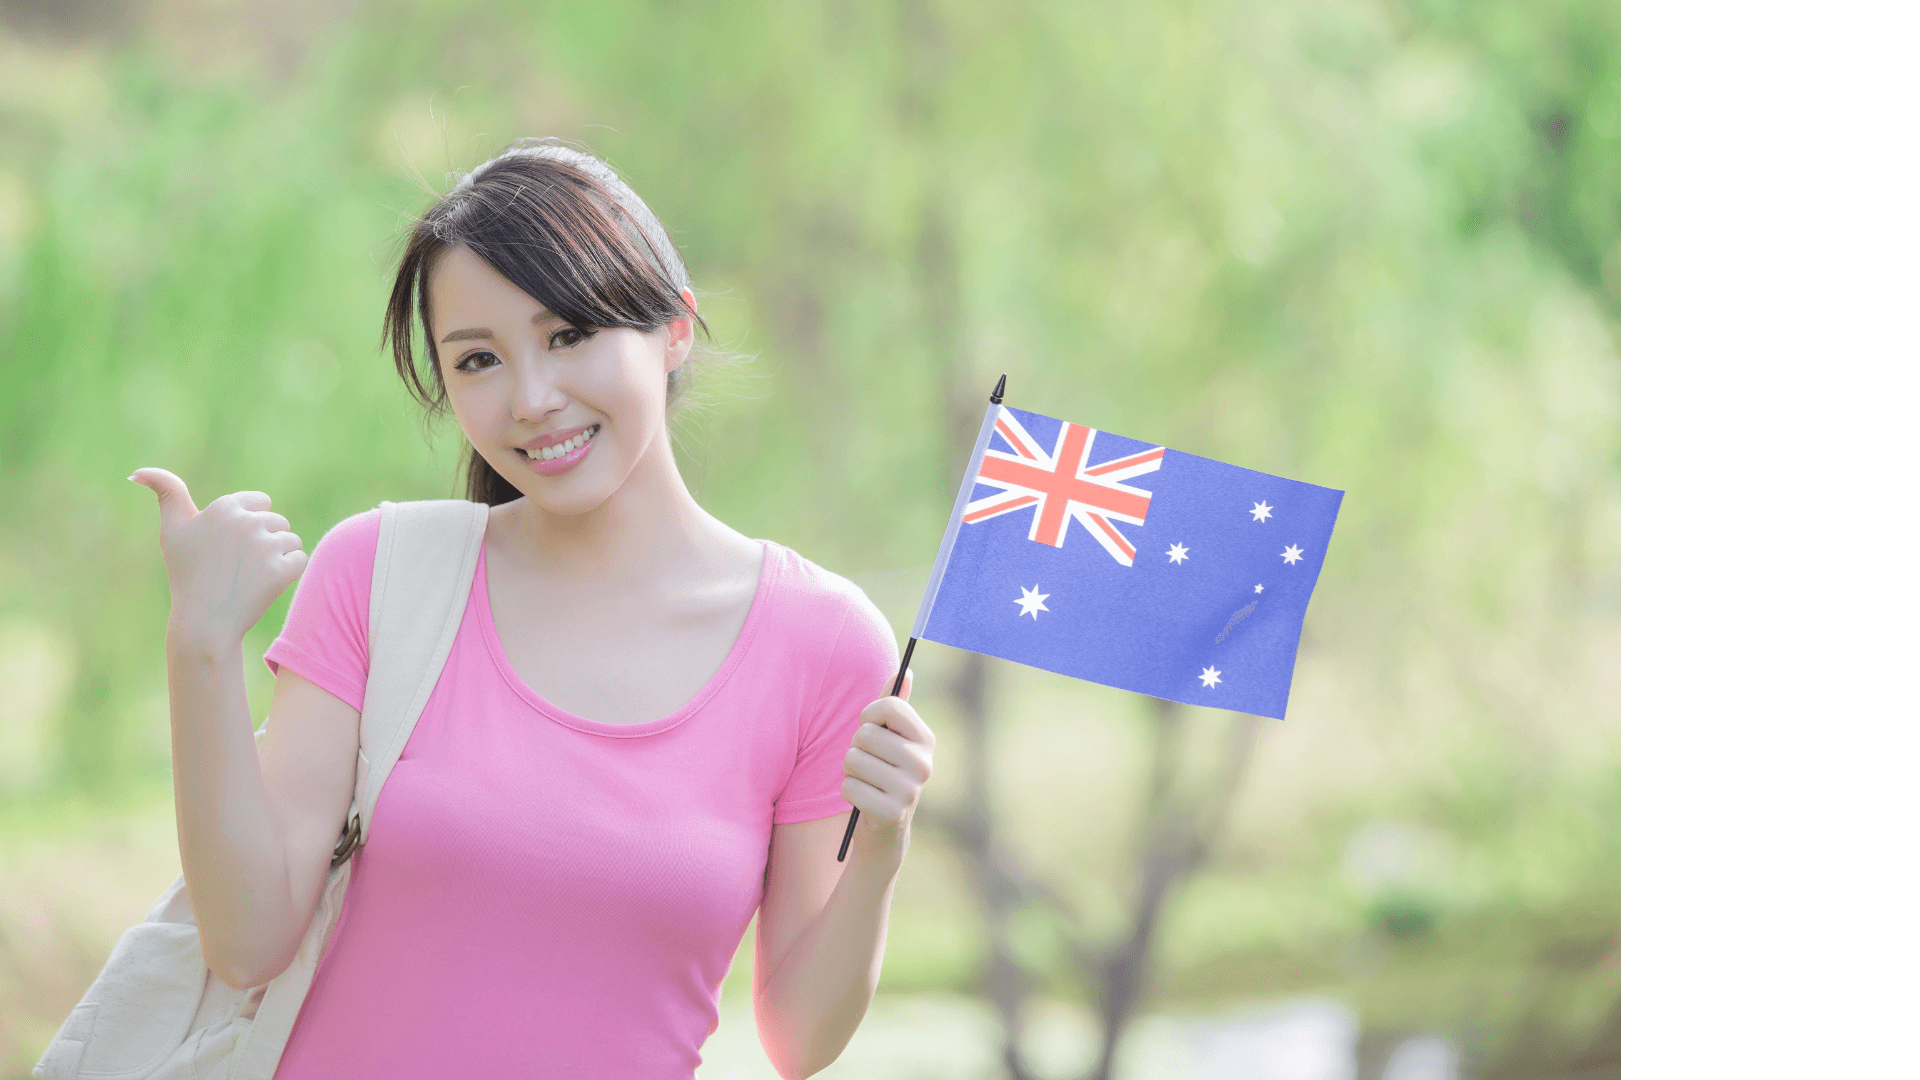 International Student Life in Australia – What to Expect